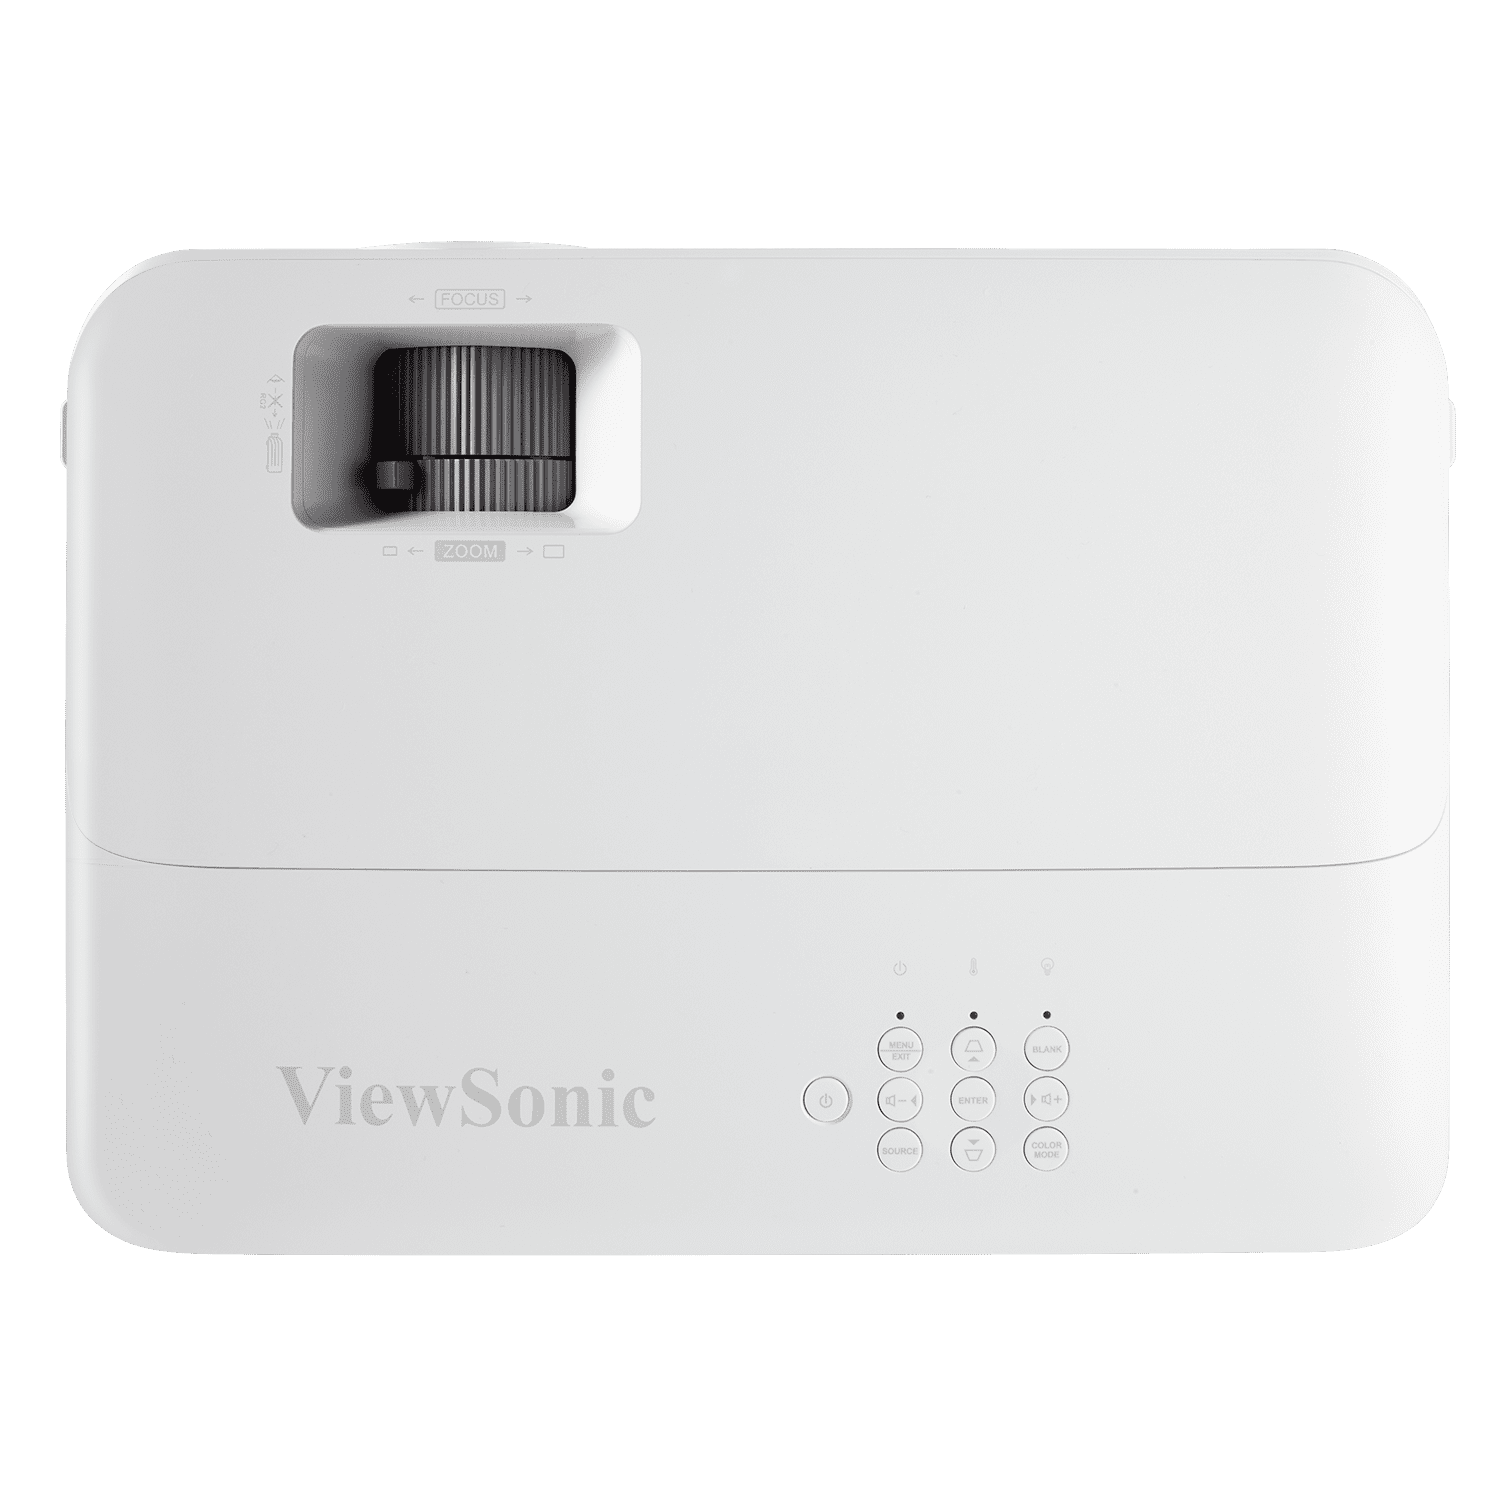 ViewSonic PG706HD 4000 Lumens Full HD 1080p Projector with RJ45 